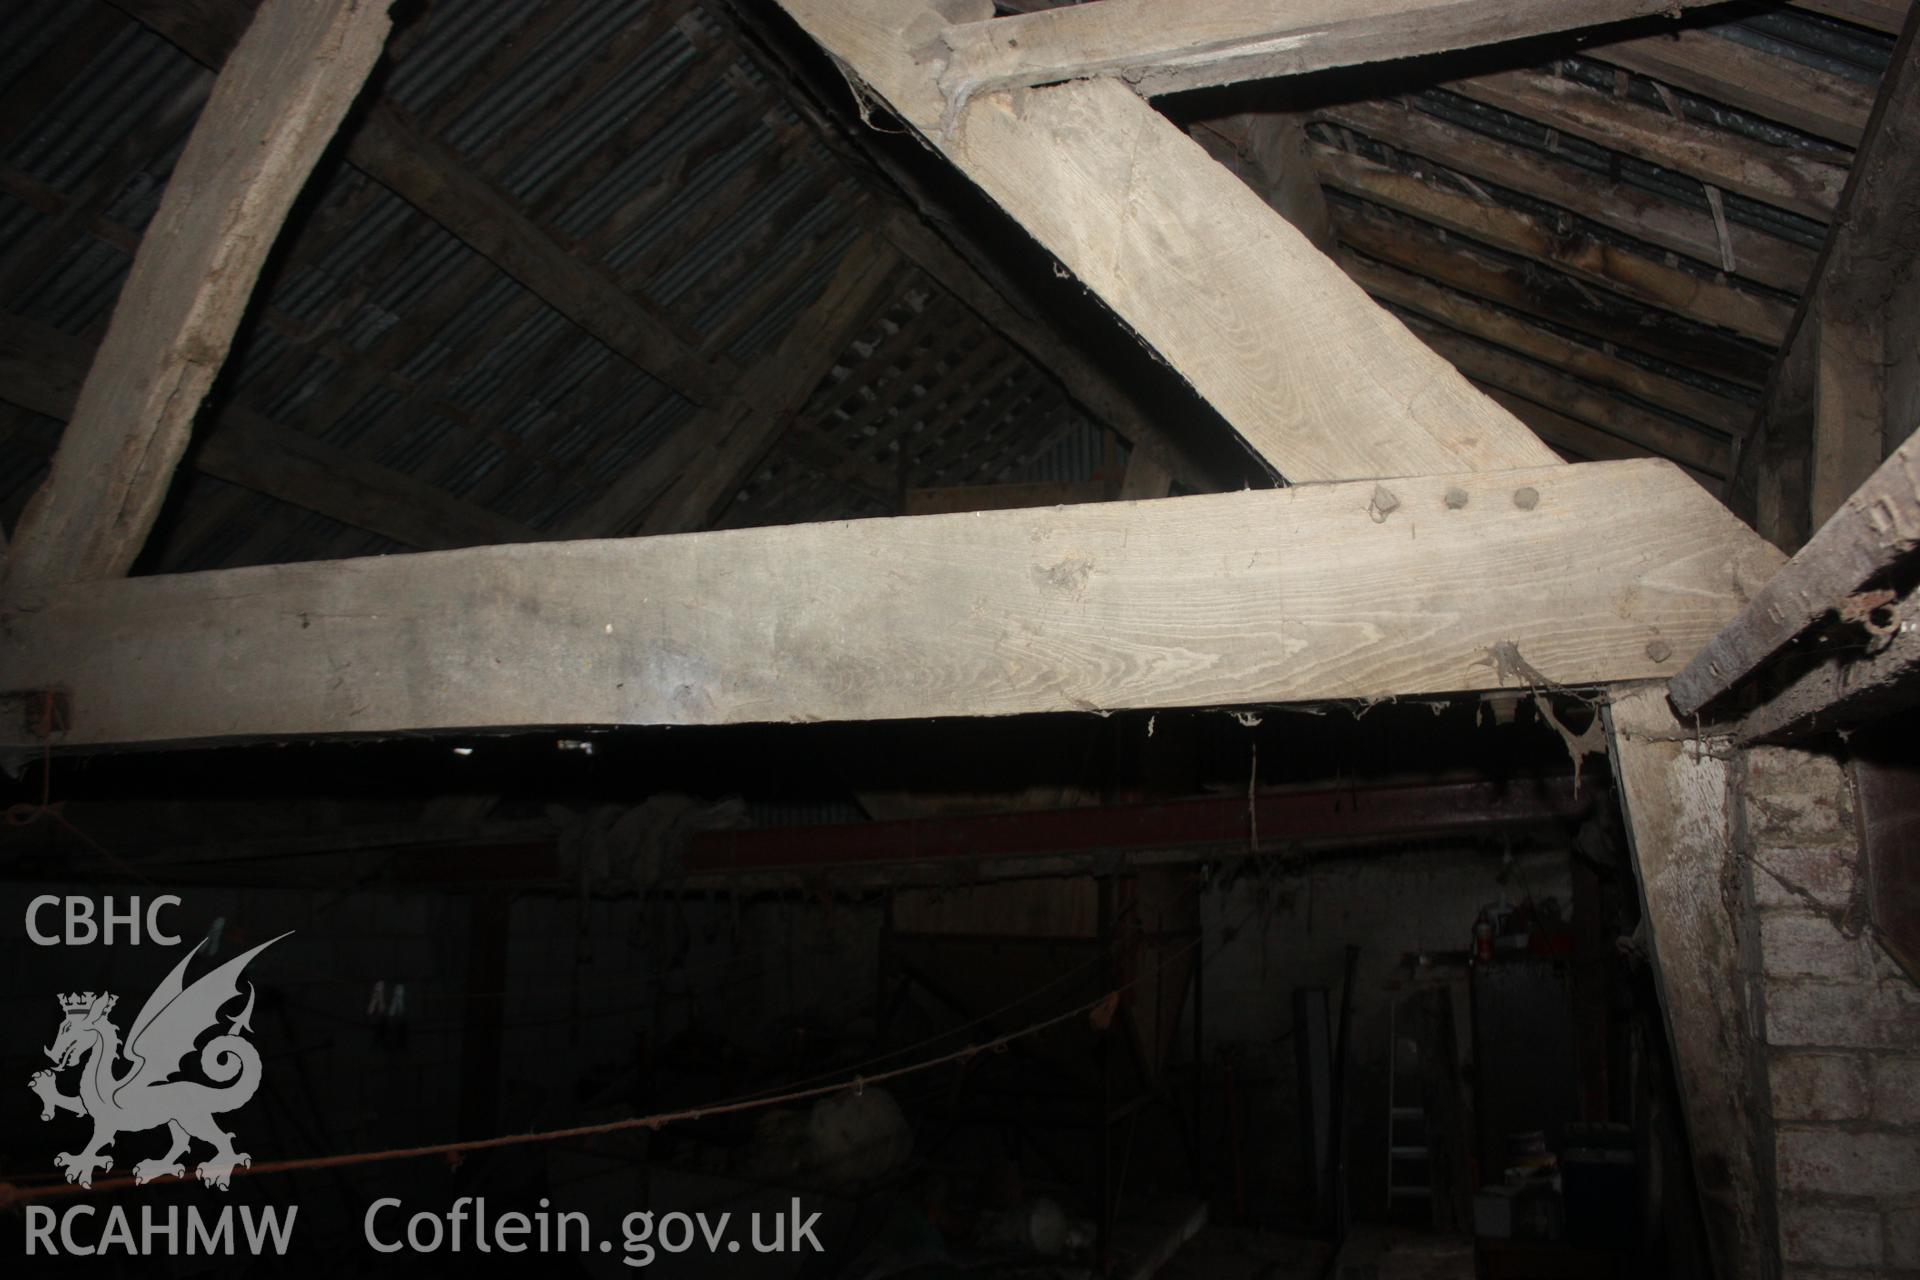 Interior view of barn or shed showing timber building frame and corrugated iron roof. Photographic survey of Glanhafon-Fawr Farmstead conducted by Geoff Ward on 4th November 2010.